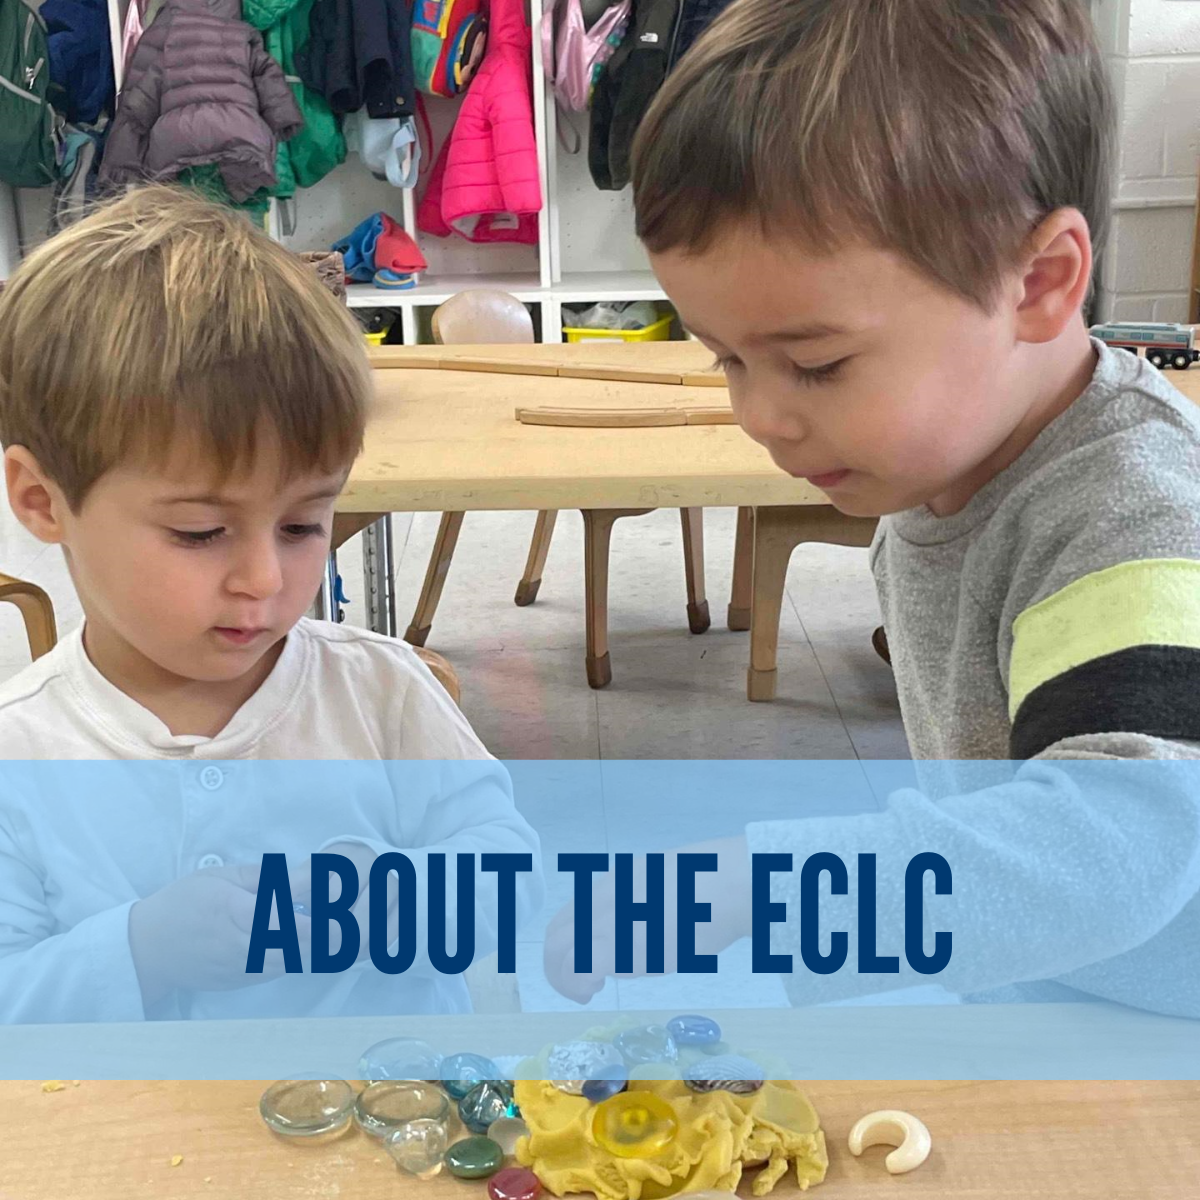 About the ECLC